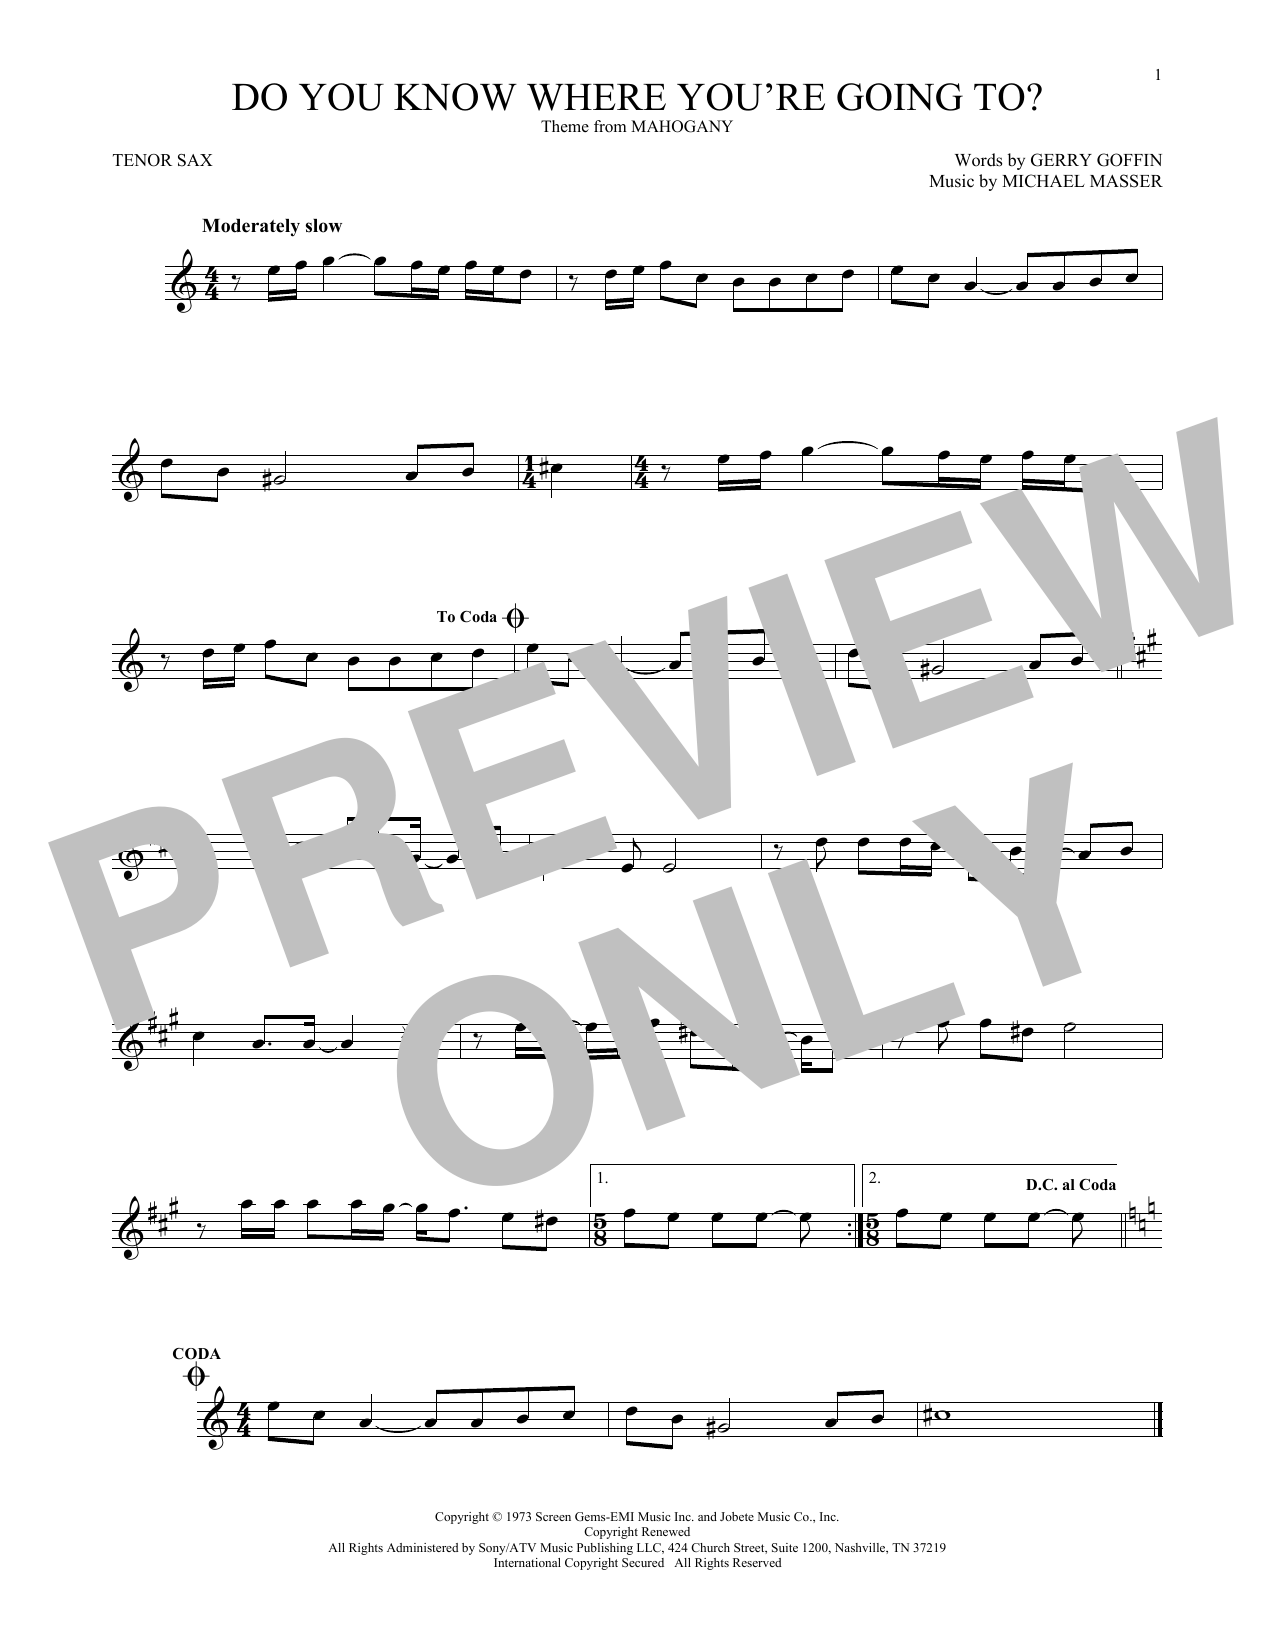 Download Diana Ross Do You Know Where You're Going To? Sheet Music